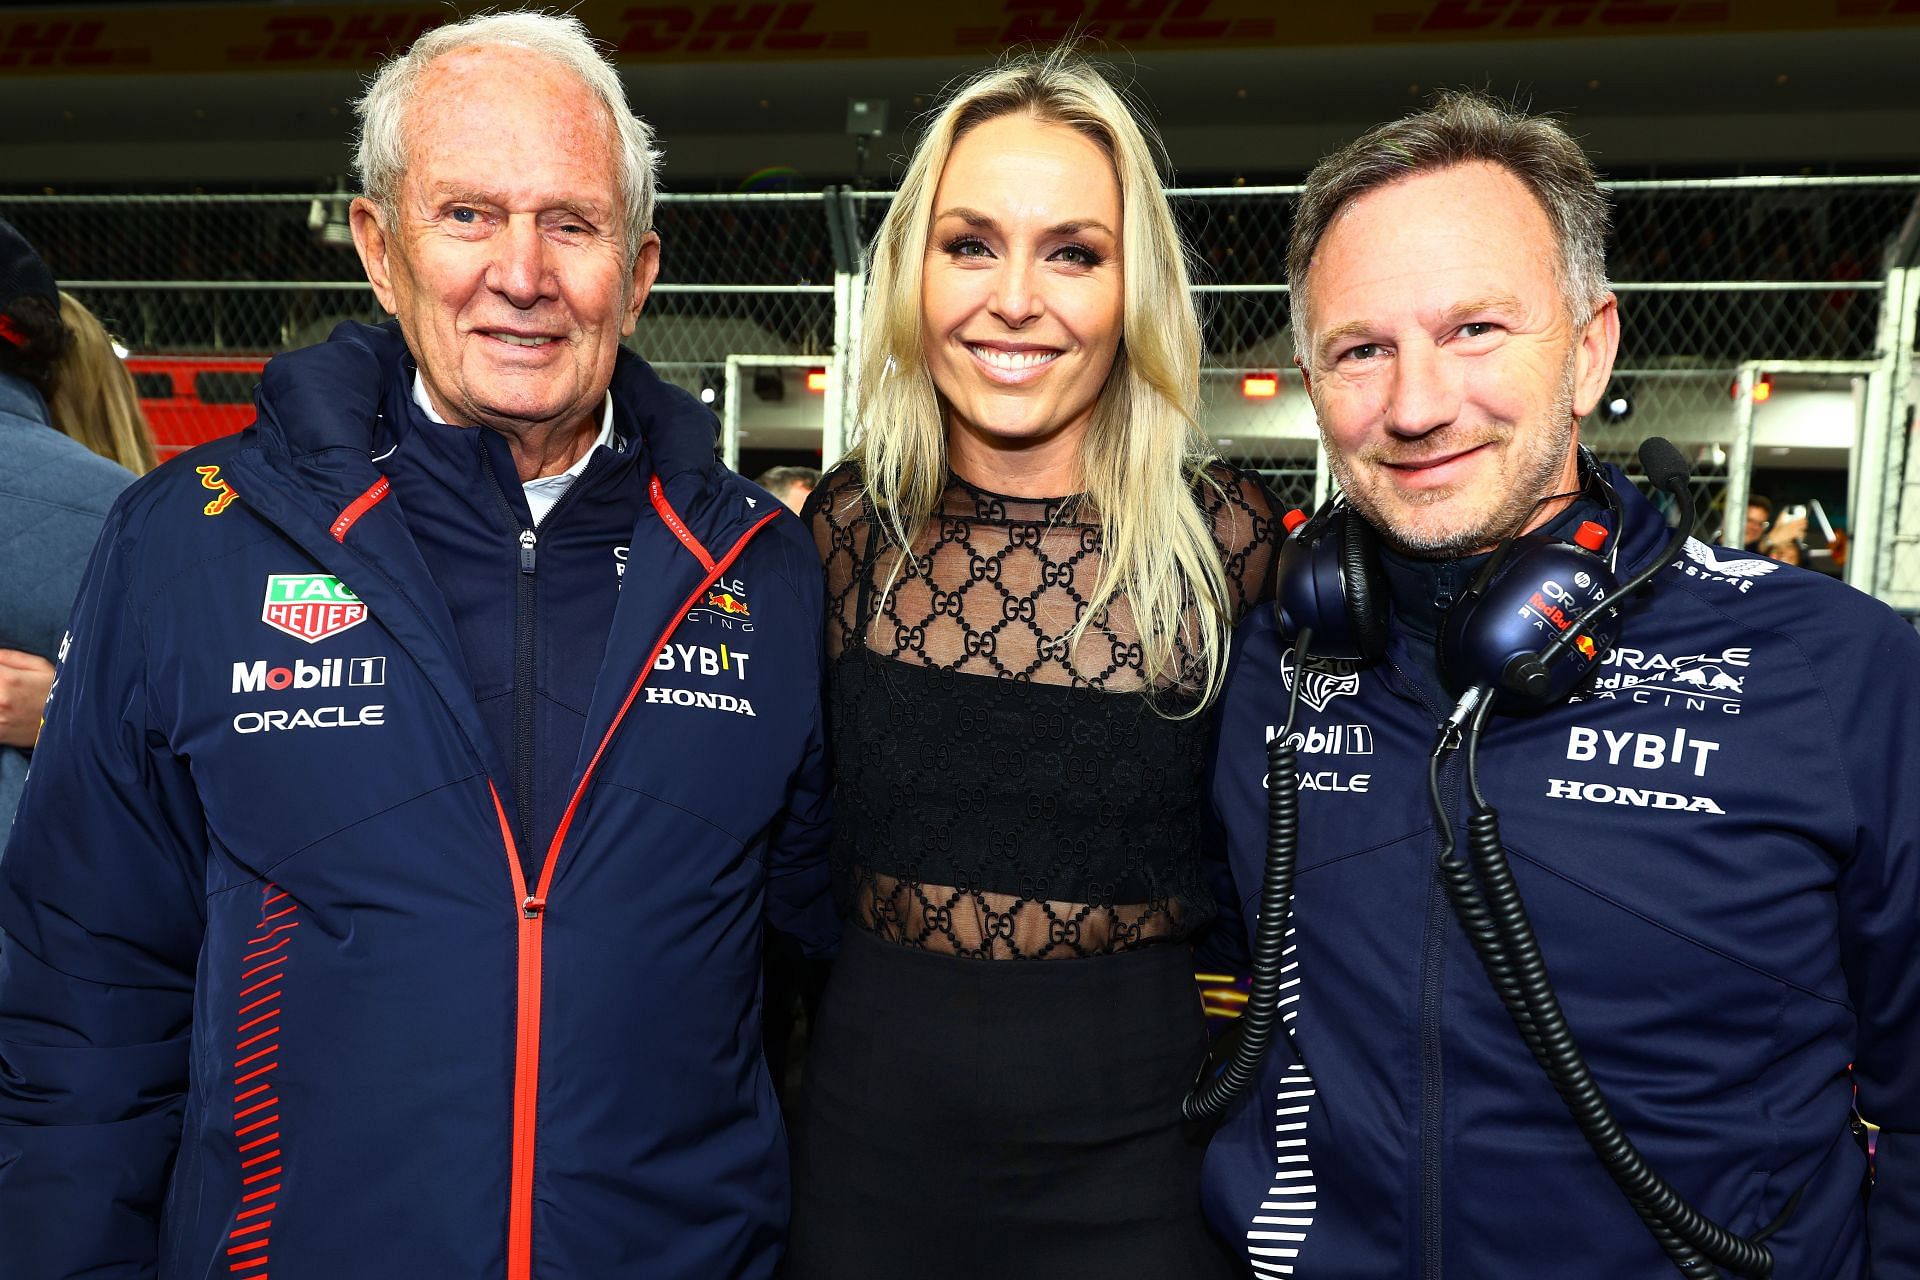 Lindsey Vonn with members of the Red Bull racing team at the Las Vegas Grand Prix